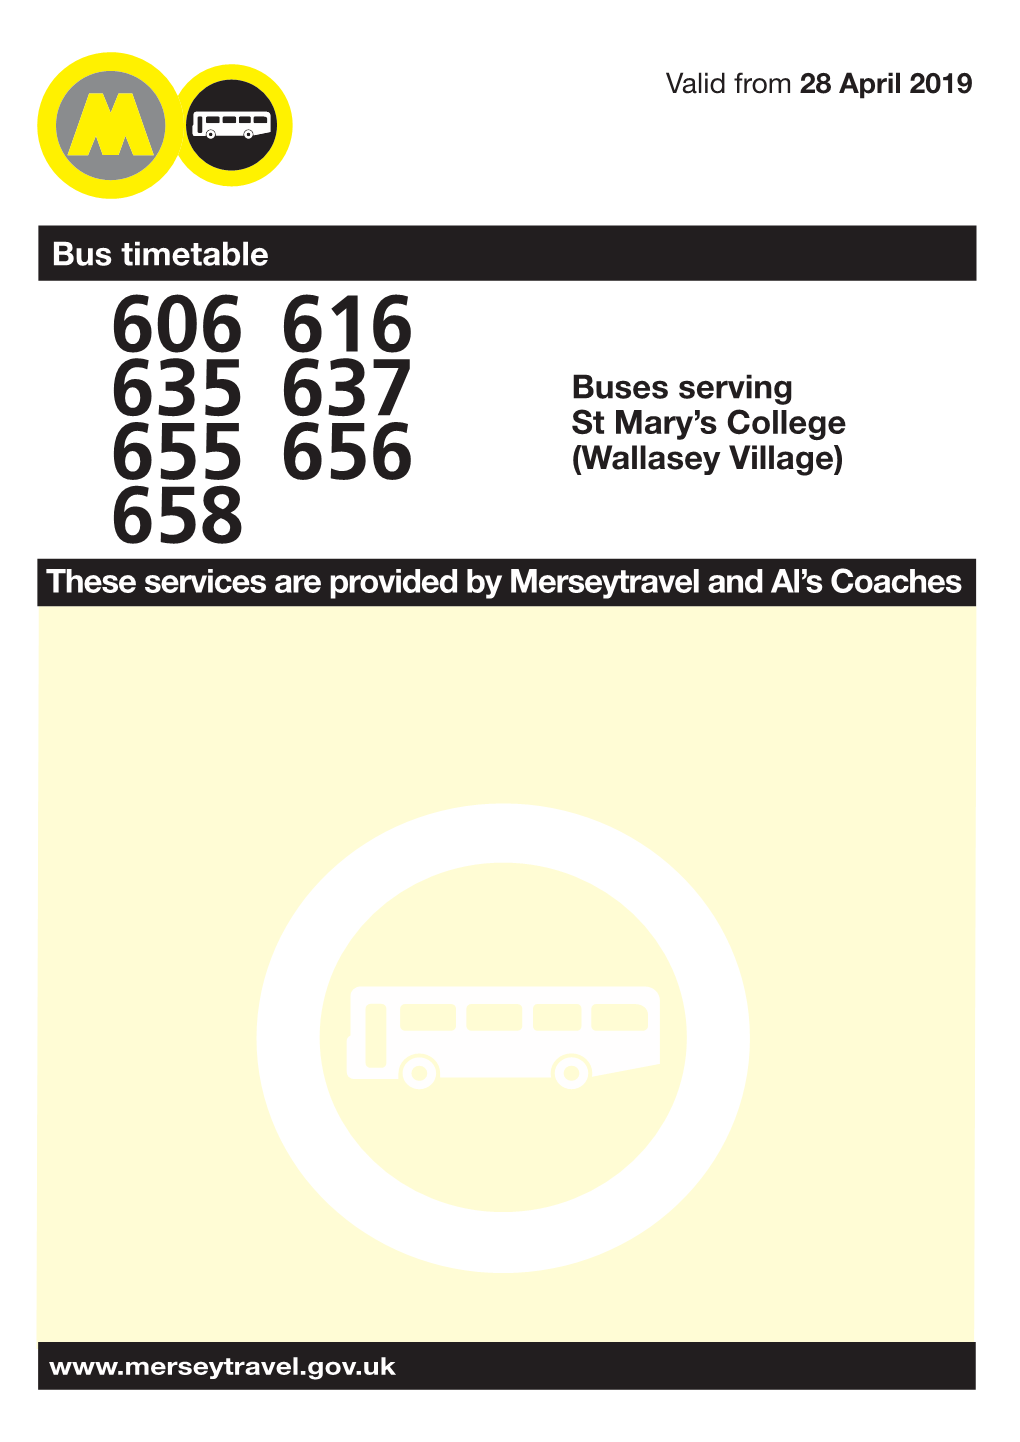 Buses Serving St Mary's College from 28 April 2019